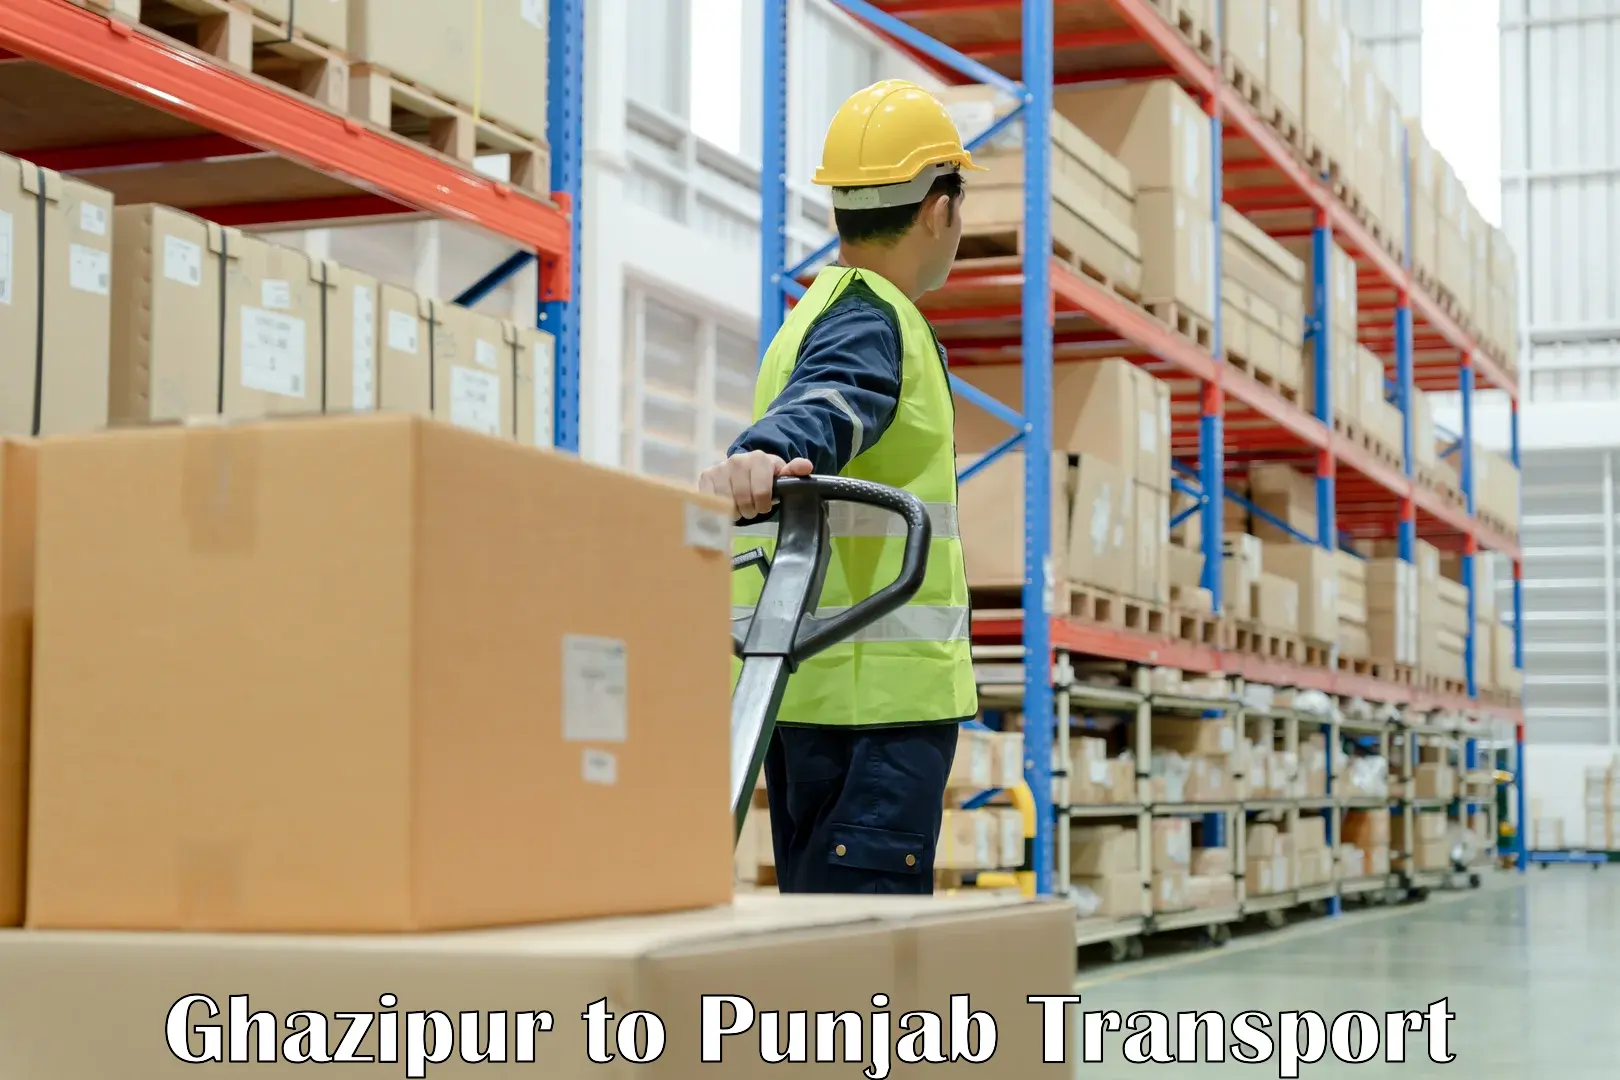 Daily parcel service transport Ghazipur to Bathinda